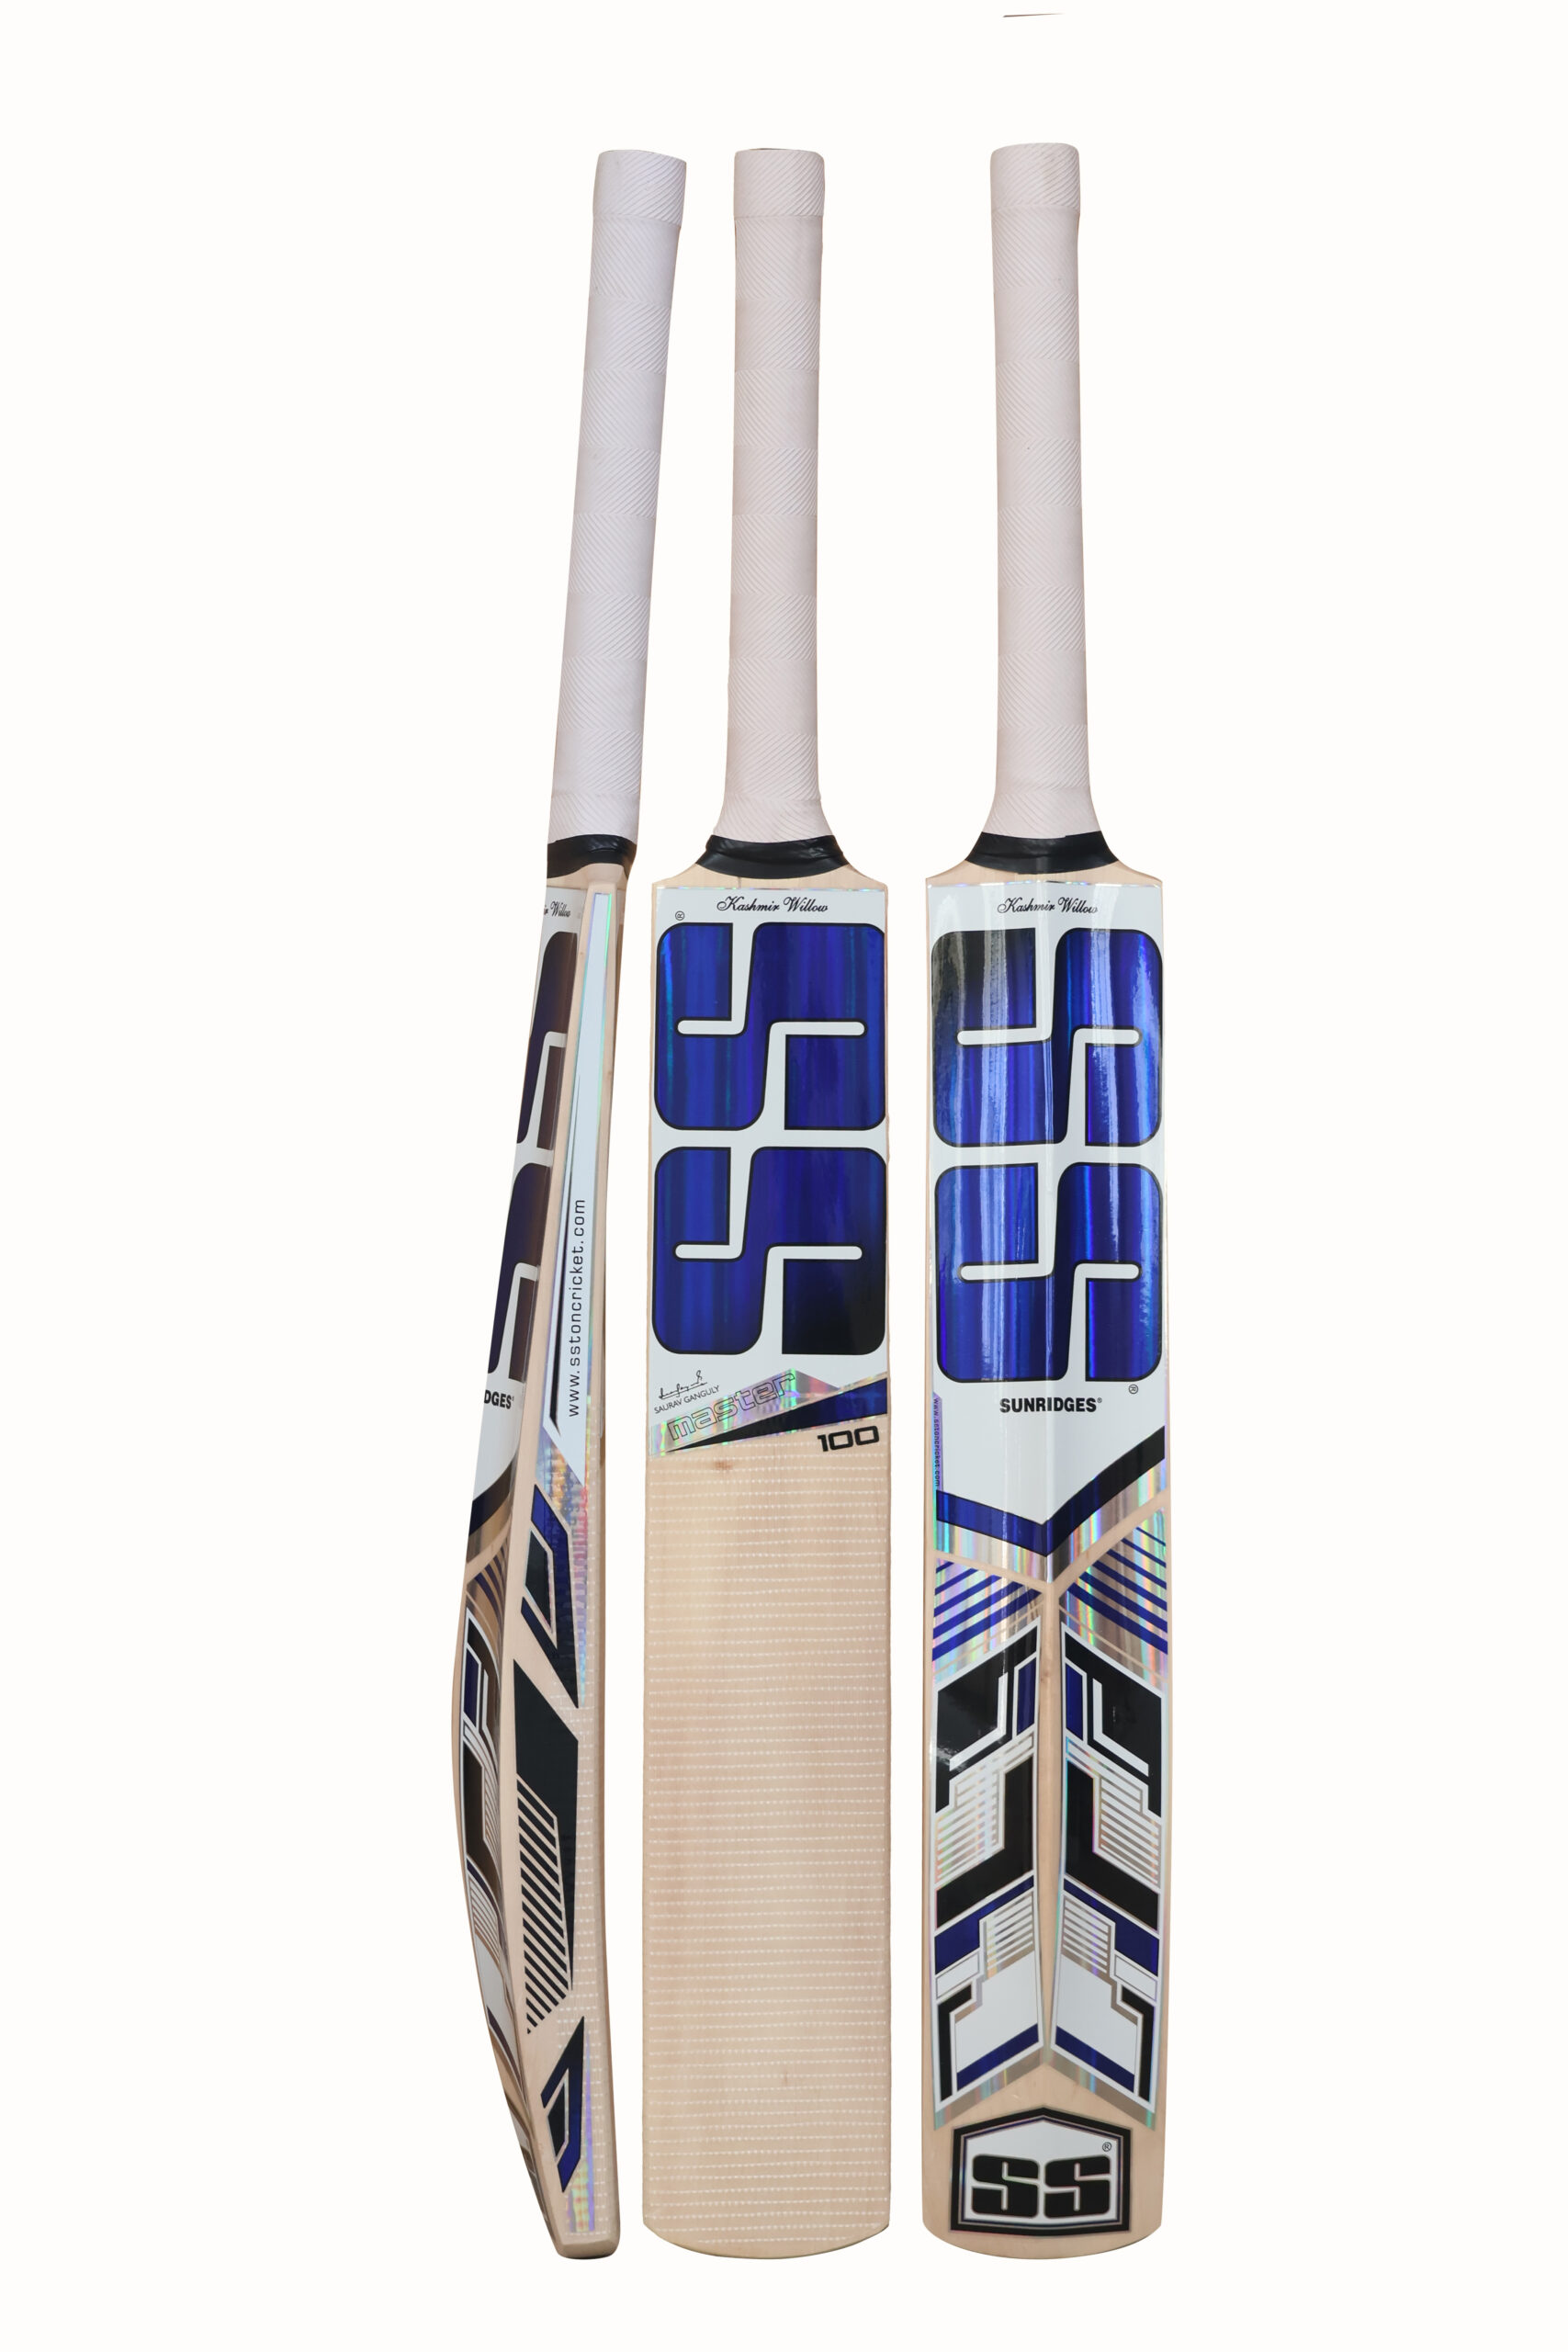 Buy SS Cricket Bats At Best Prices Online SS Cricket